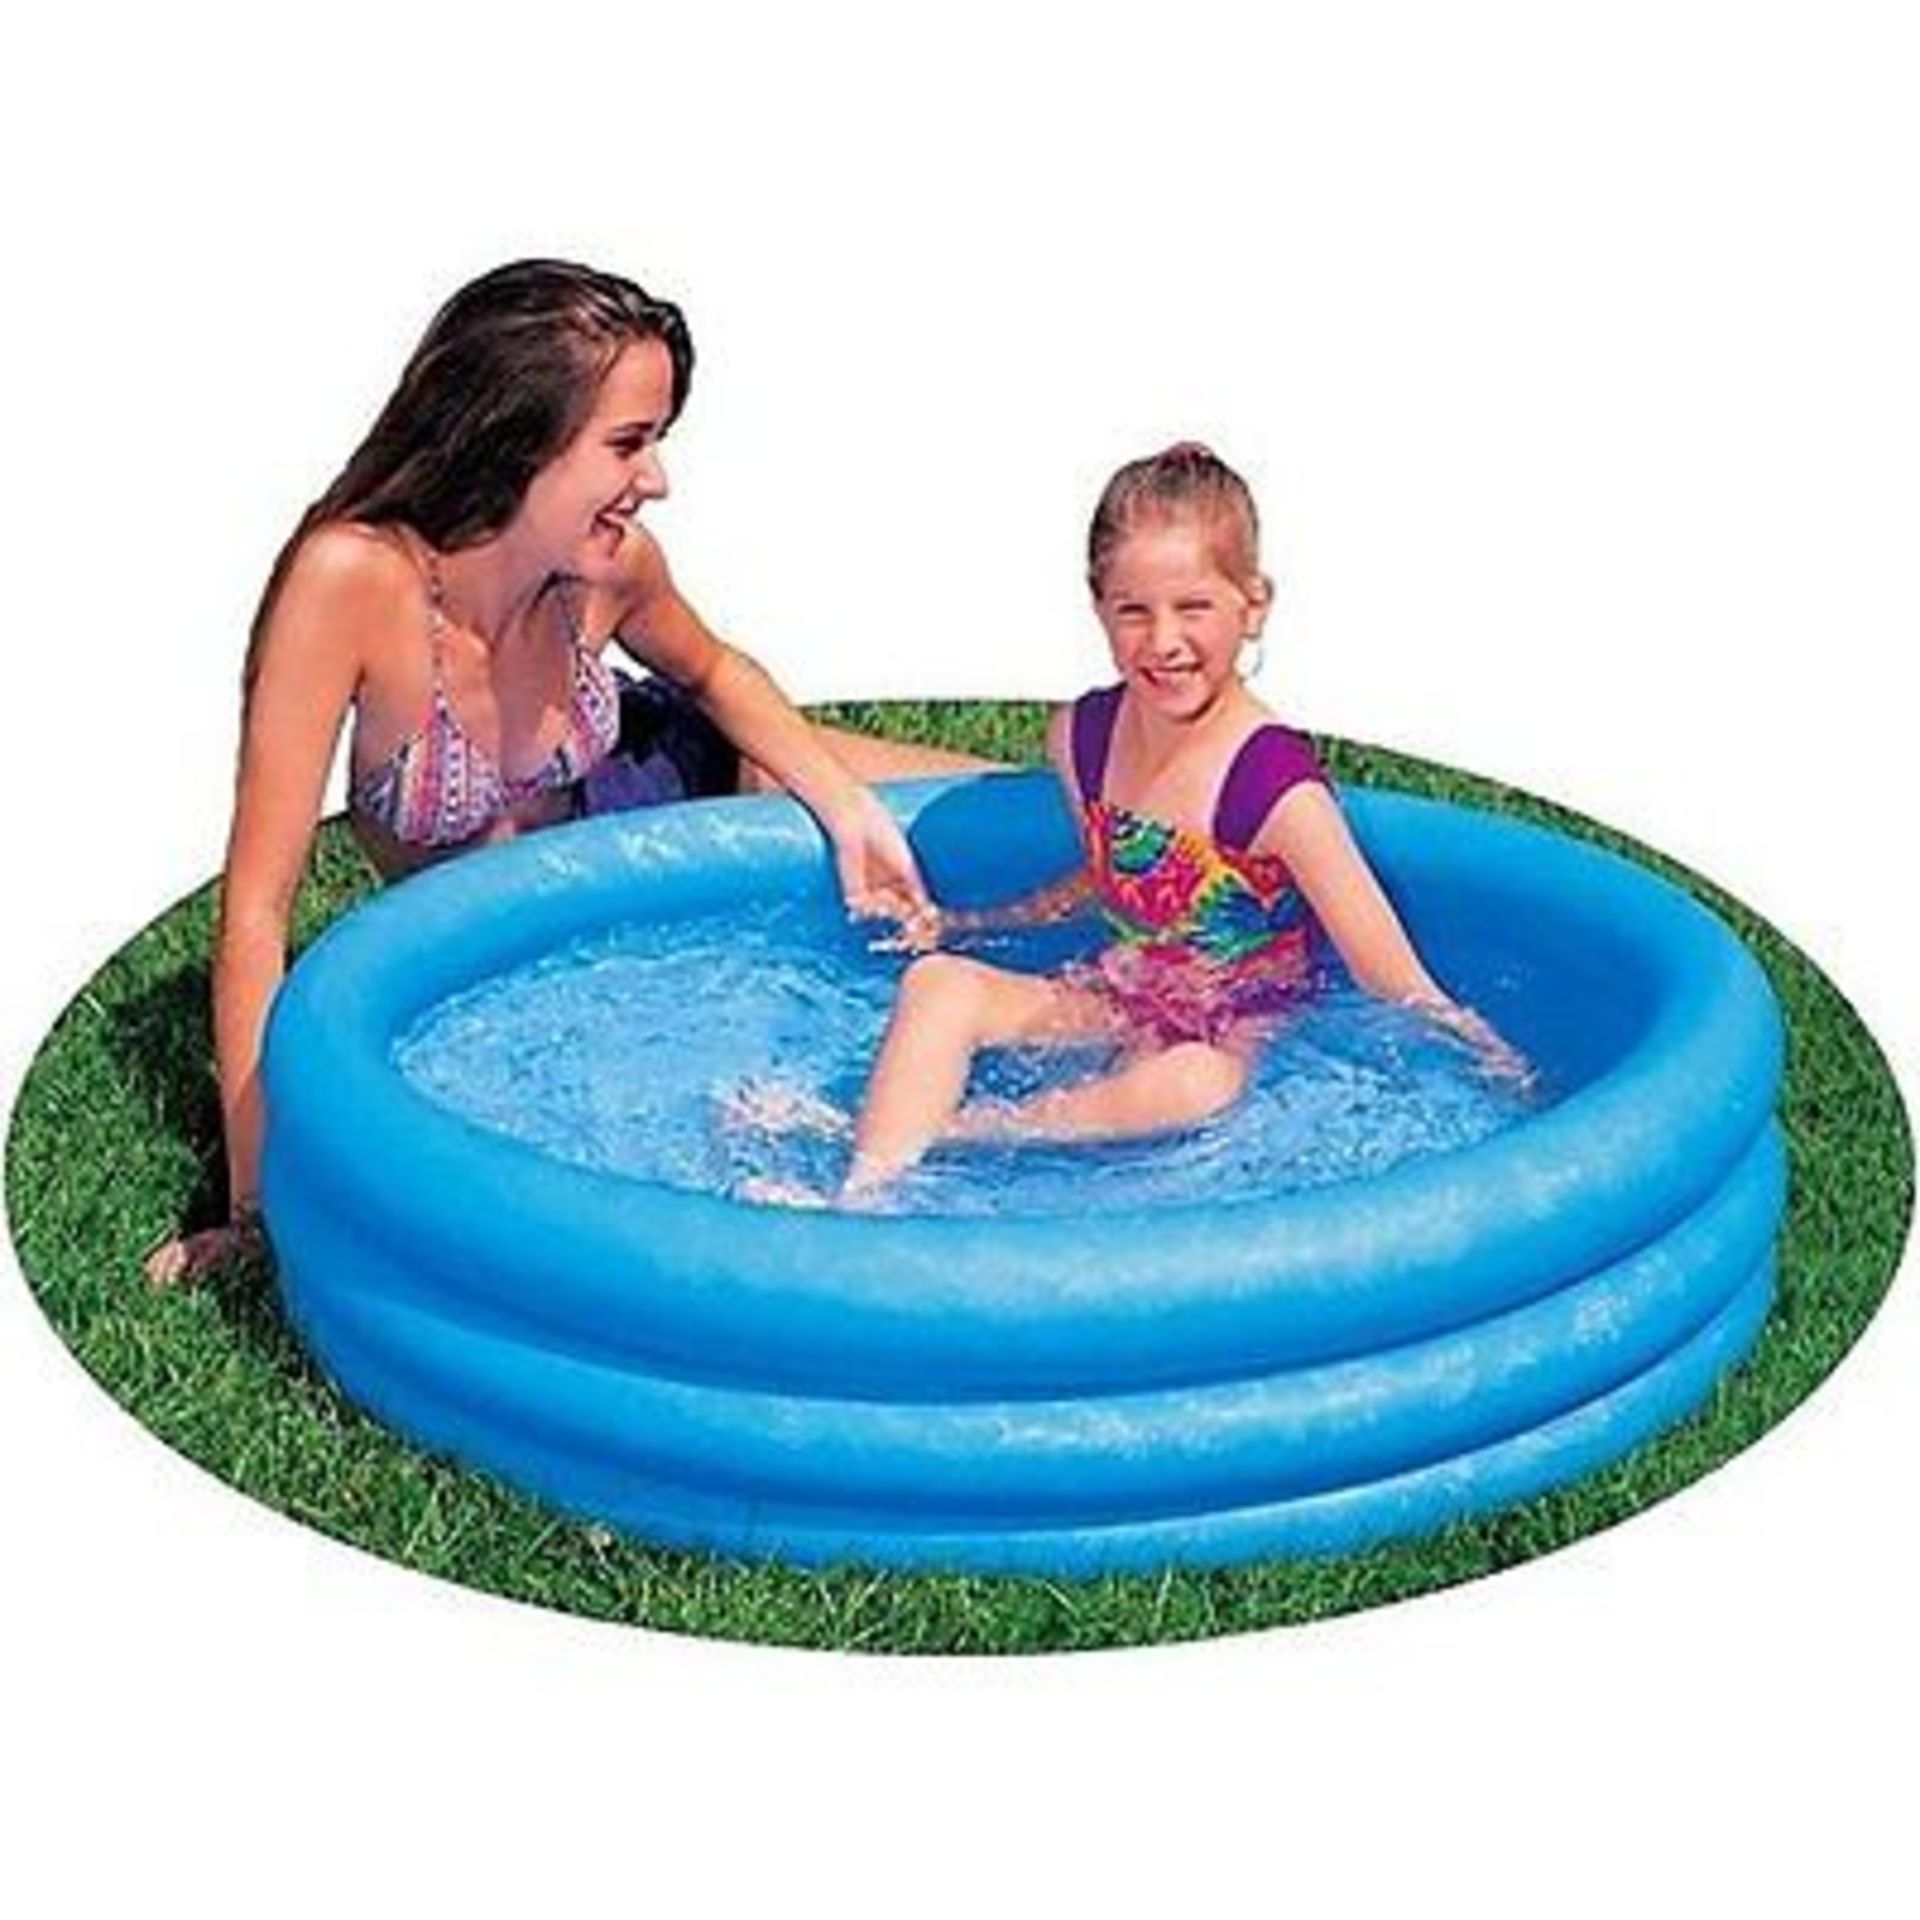 V *TRADE QTY* Brand New Kids Outdoor Three Ring Pool Age 3 Years + ISP £7.49 (Ebay) X 3 YOUR BID